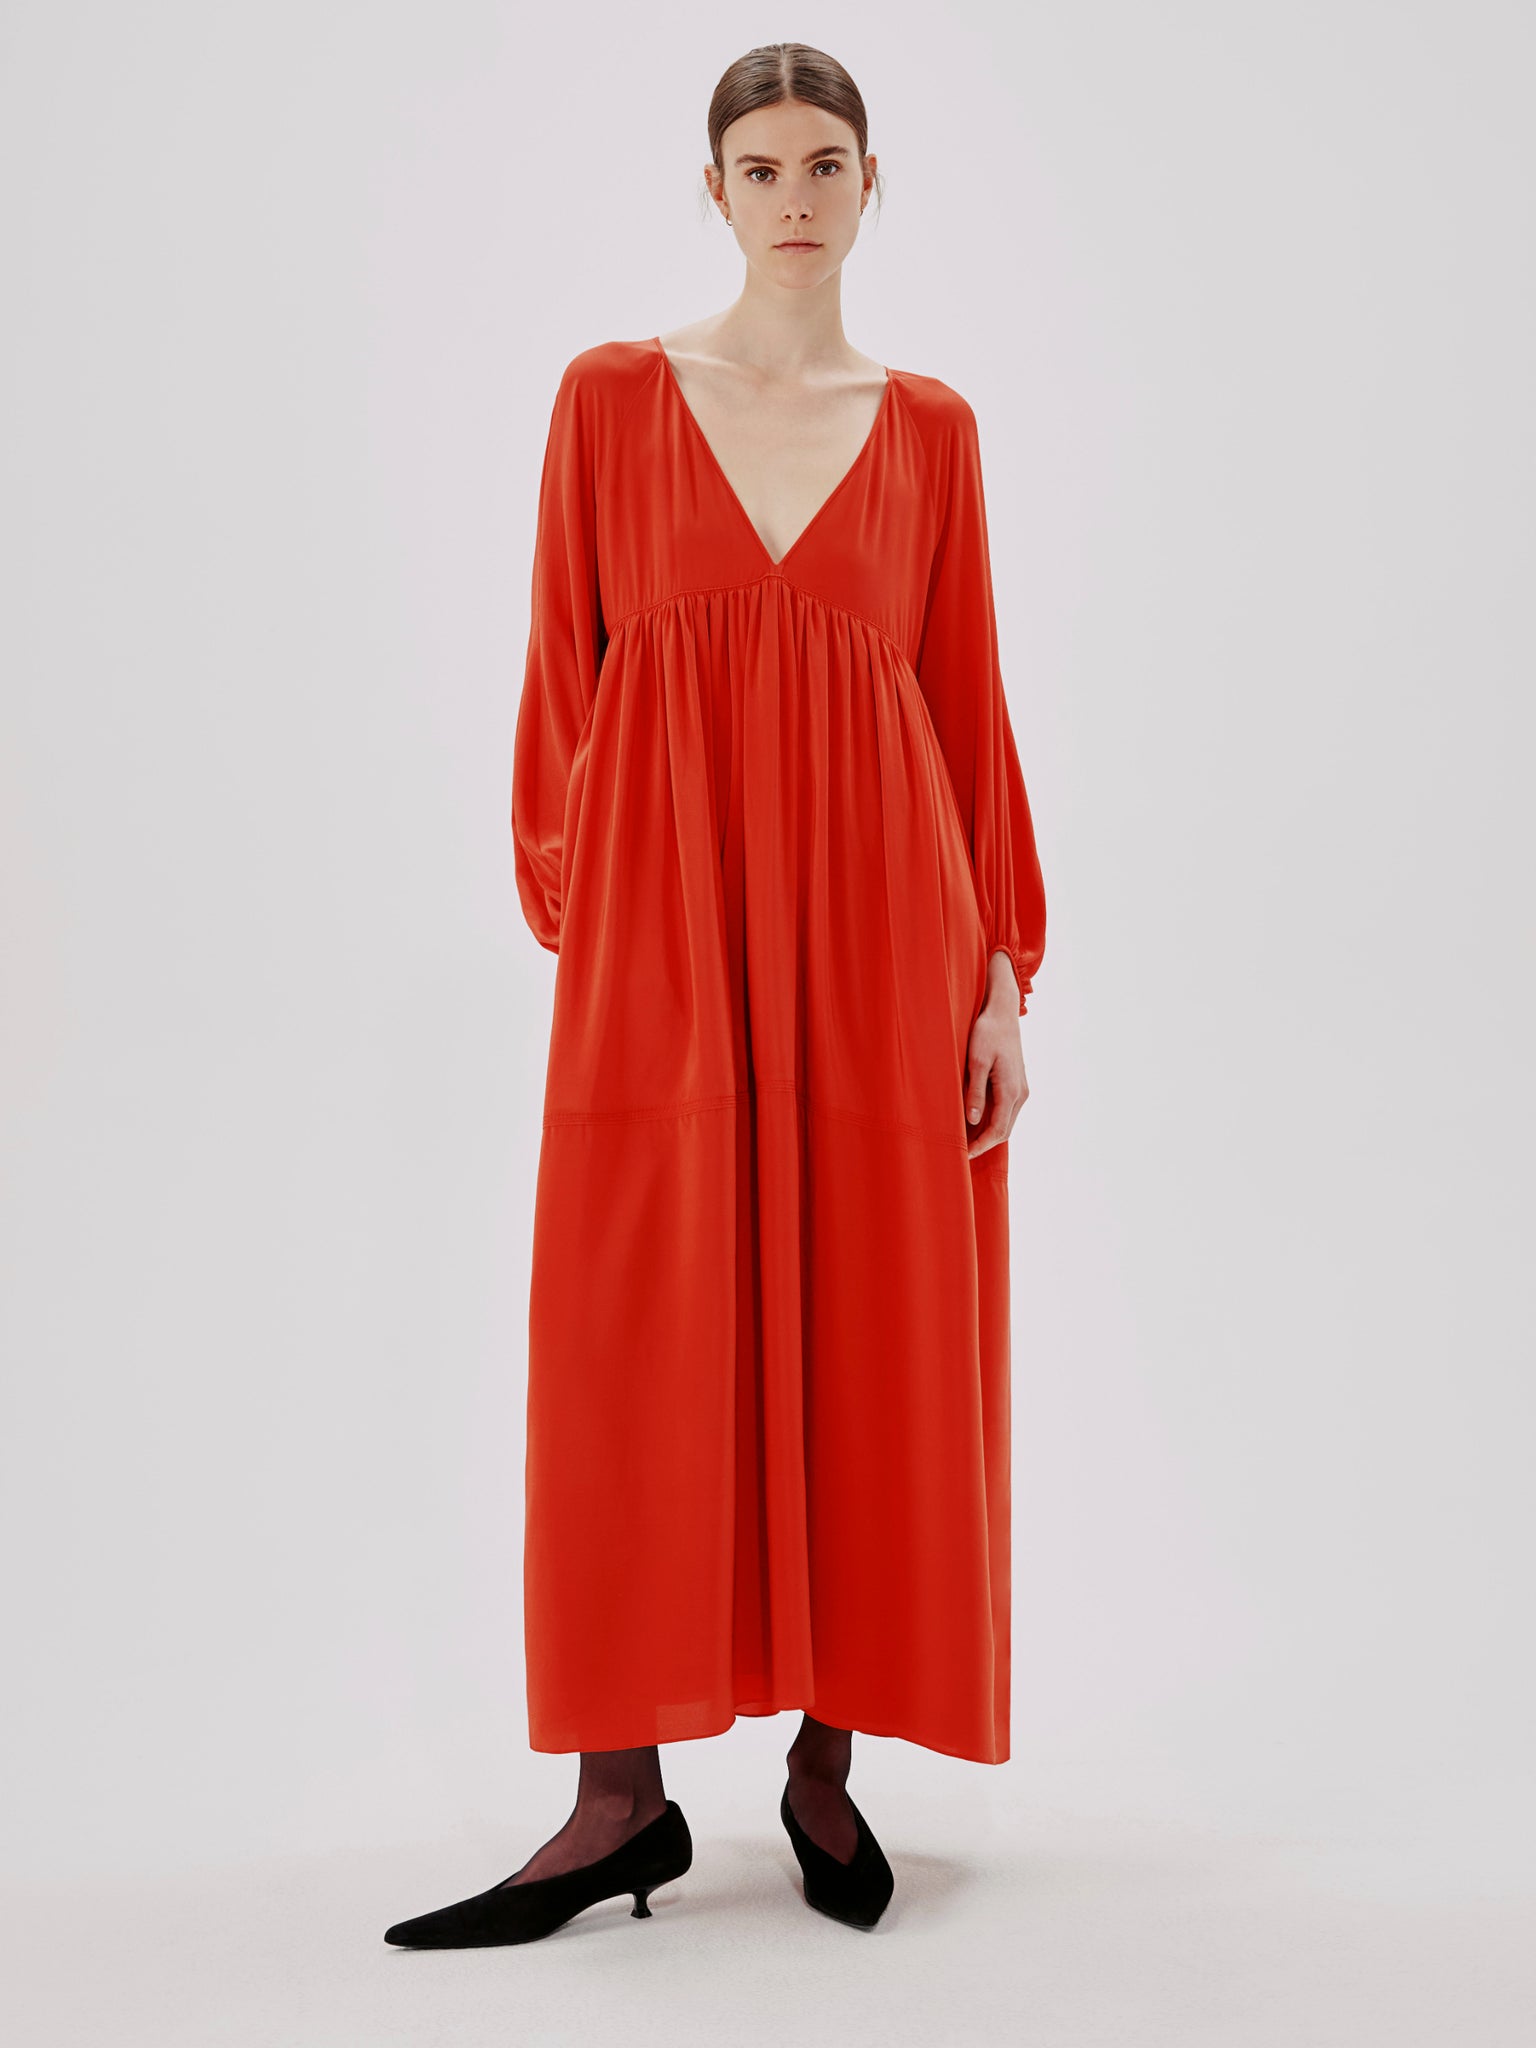 Another Tomorrow Empire Cocoon Dress In Tomato